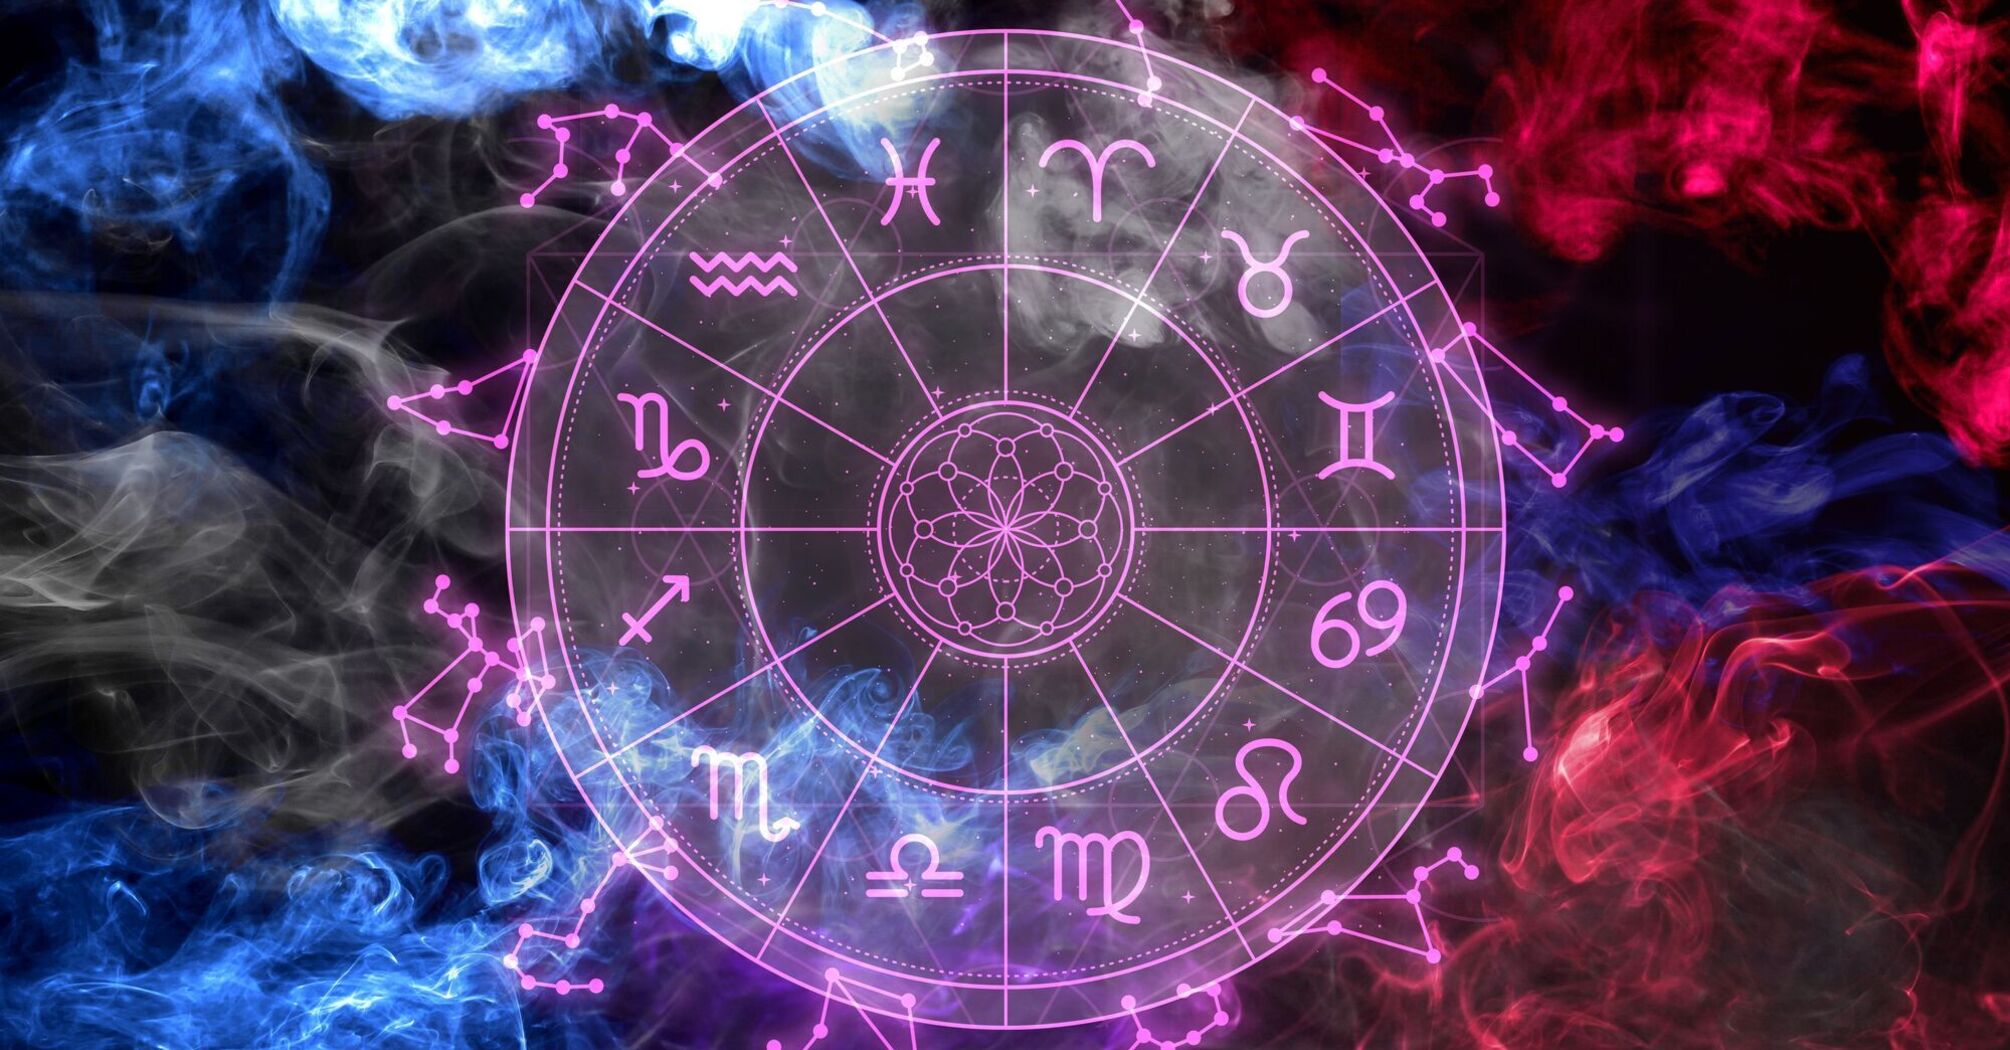 Achieving goals or relationship imbalance: horoscope for all zodiac signs on April 1